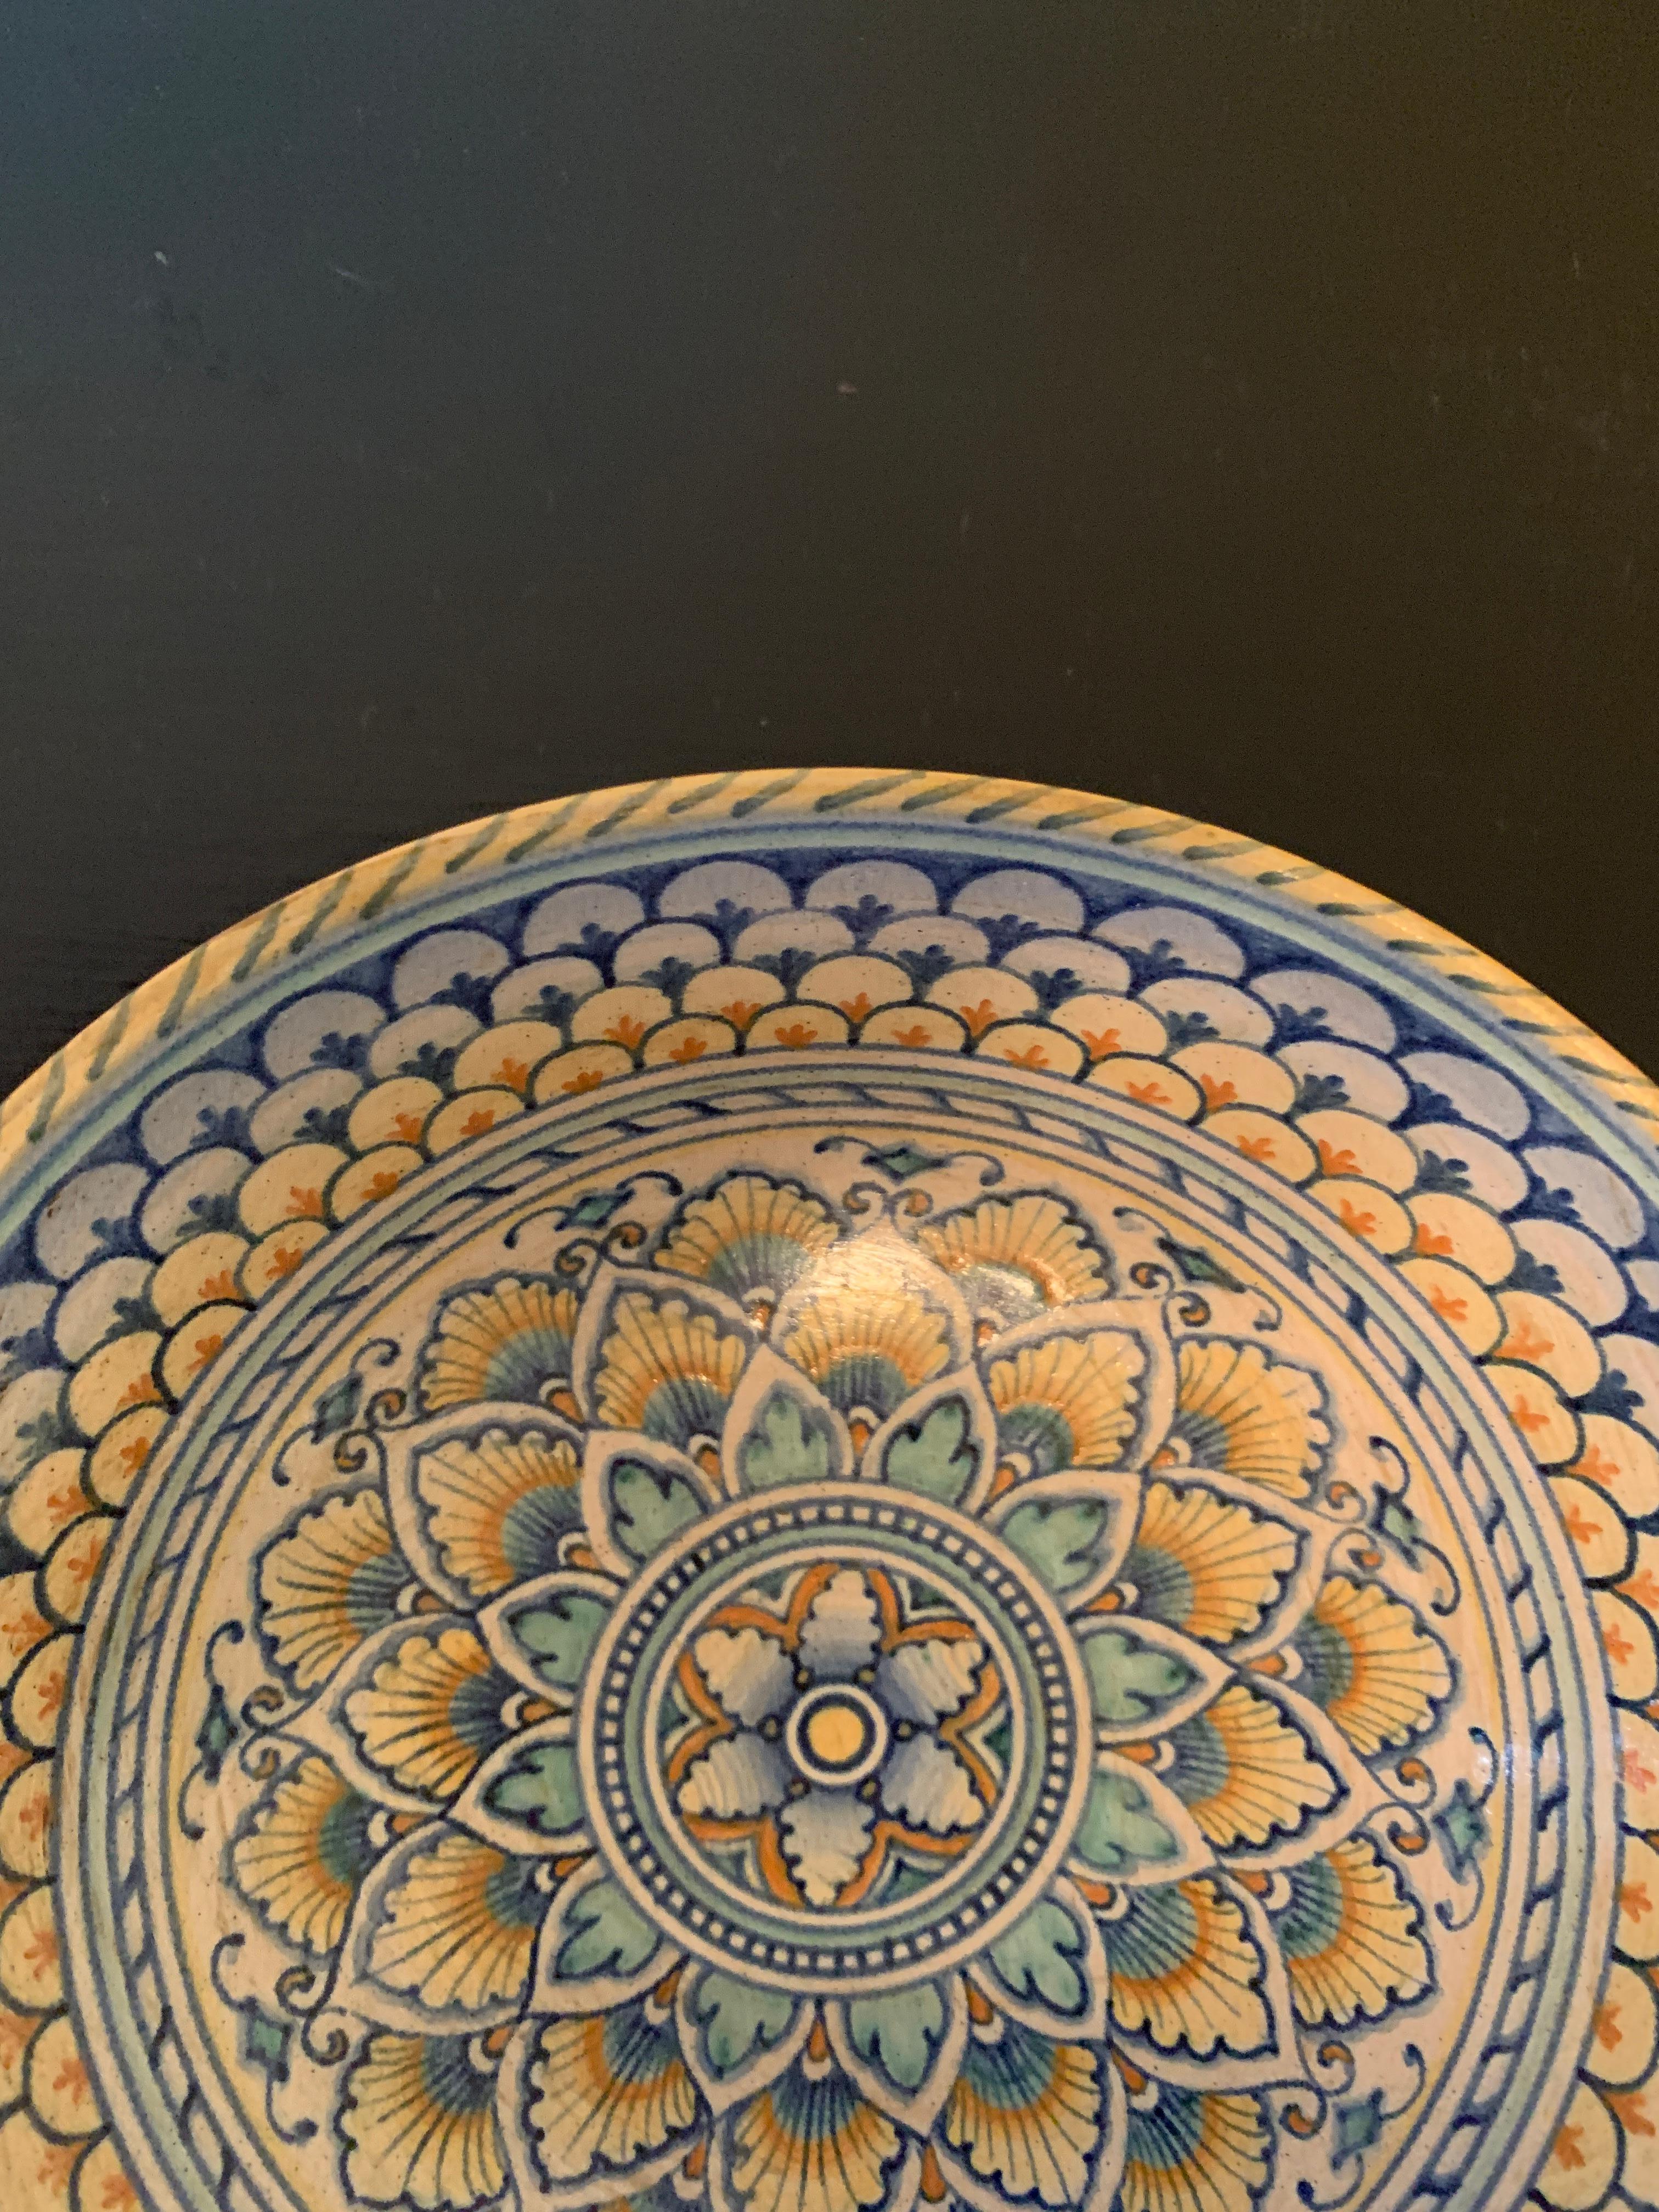 Italian Provincial Deruta Hand Painted Faience Pottery Bowl 1